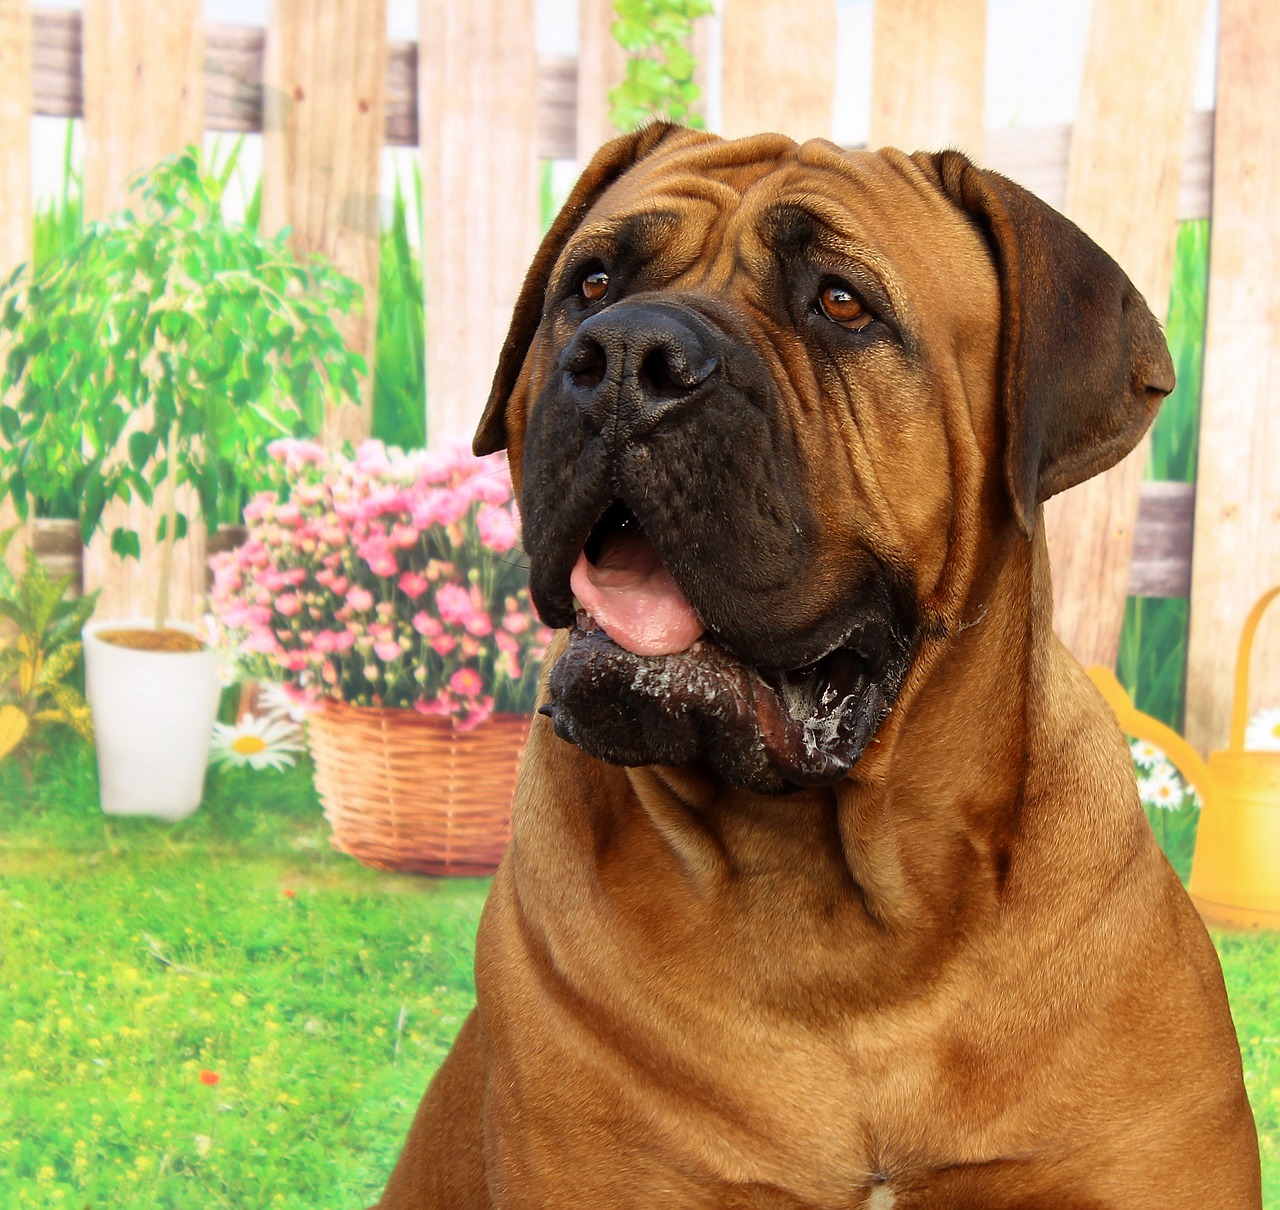 a large brown dog sitting on top of a lush green field, a pastel, by Aleksander Gierymski, shutterstock, renaissance, handsome face and beautiful face, wrinkles and muscles, ebay photo, realistic scene